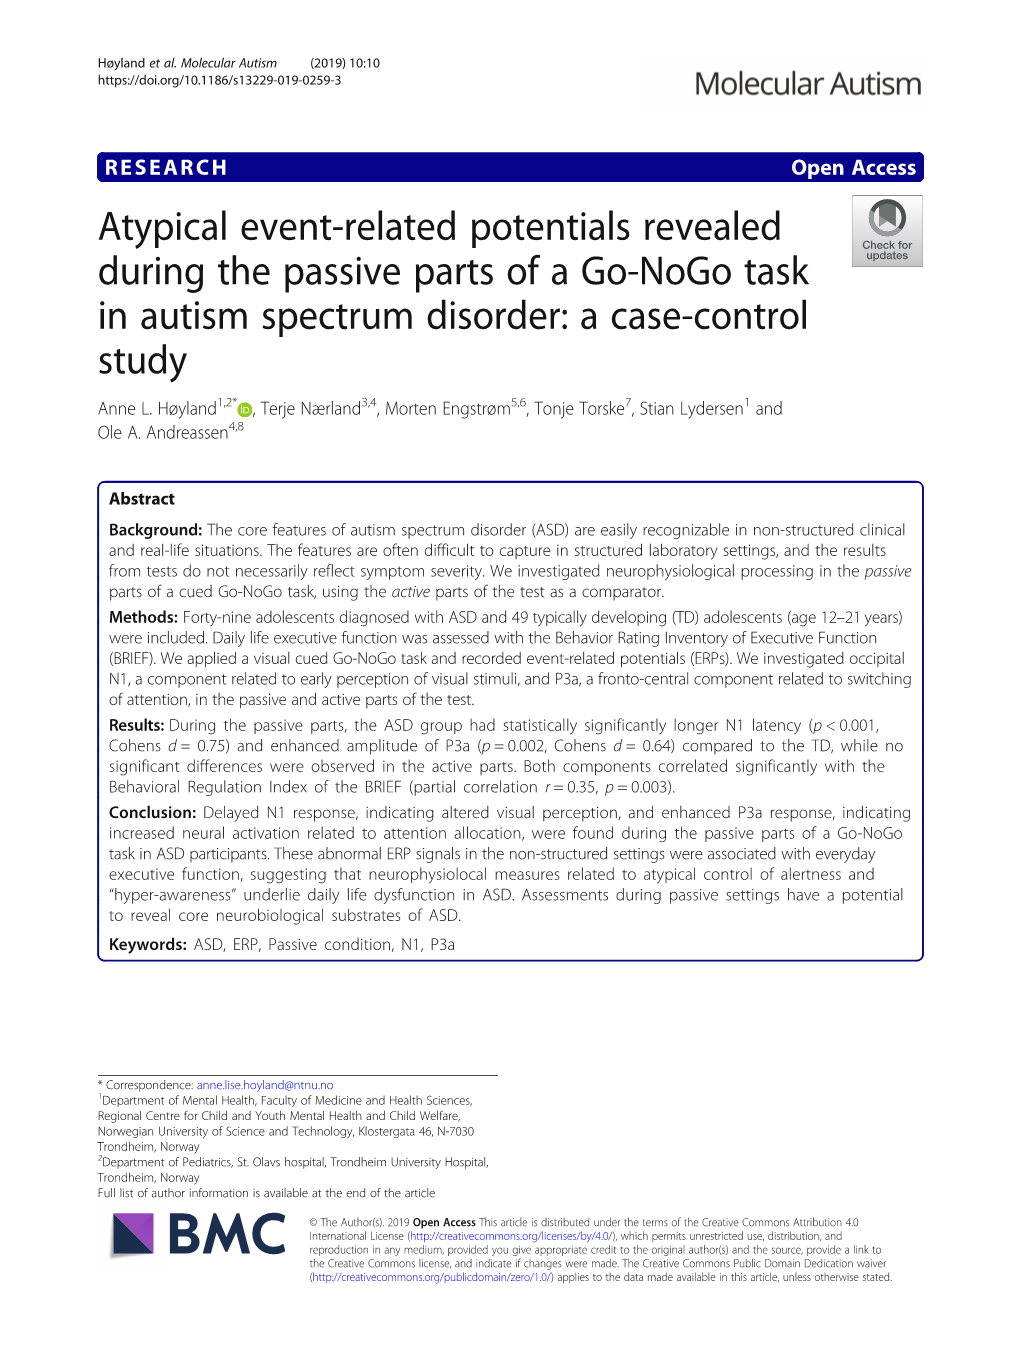 Atypical Event-Related Potentials Revealed During the Passive Parts of a Go-Nogo Task in Autism Spectrum Disorder: a Case-Control Study Anne L